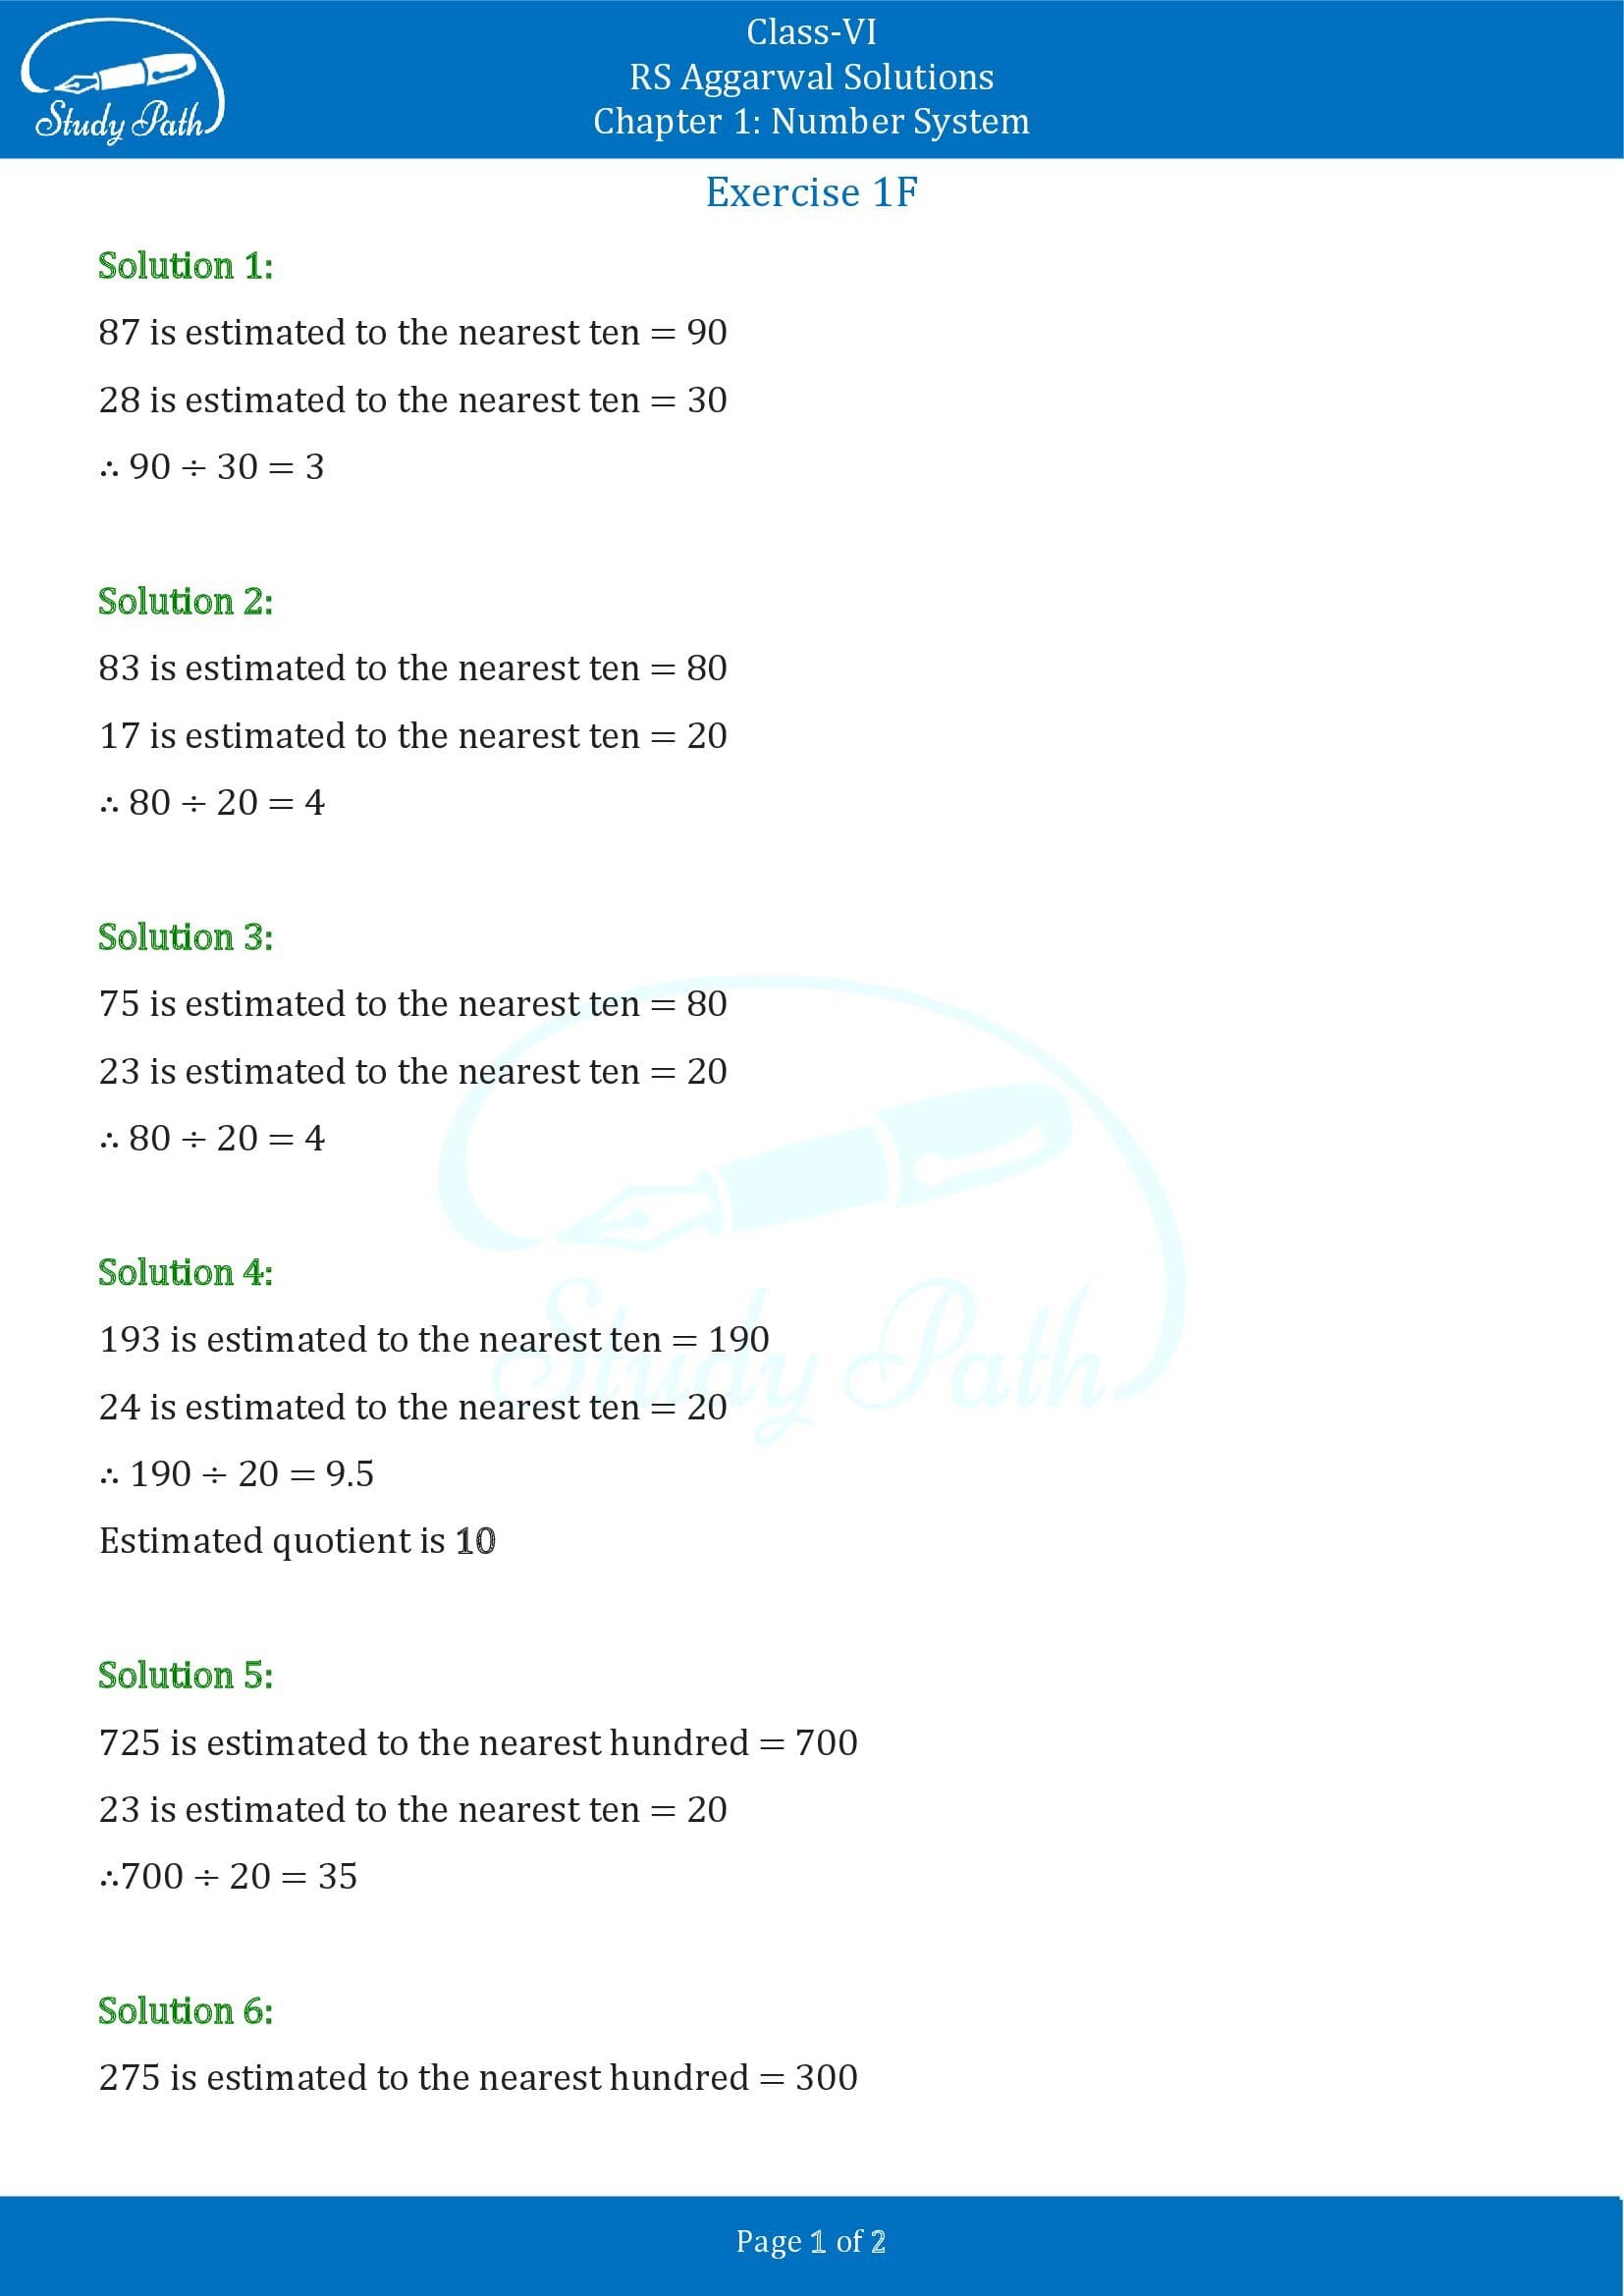 RS Aggarwal Solutions Class 6 Chapter 1 Number System Exercise 1F 001